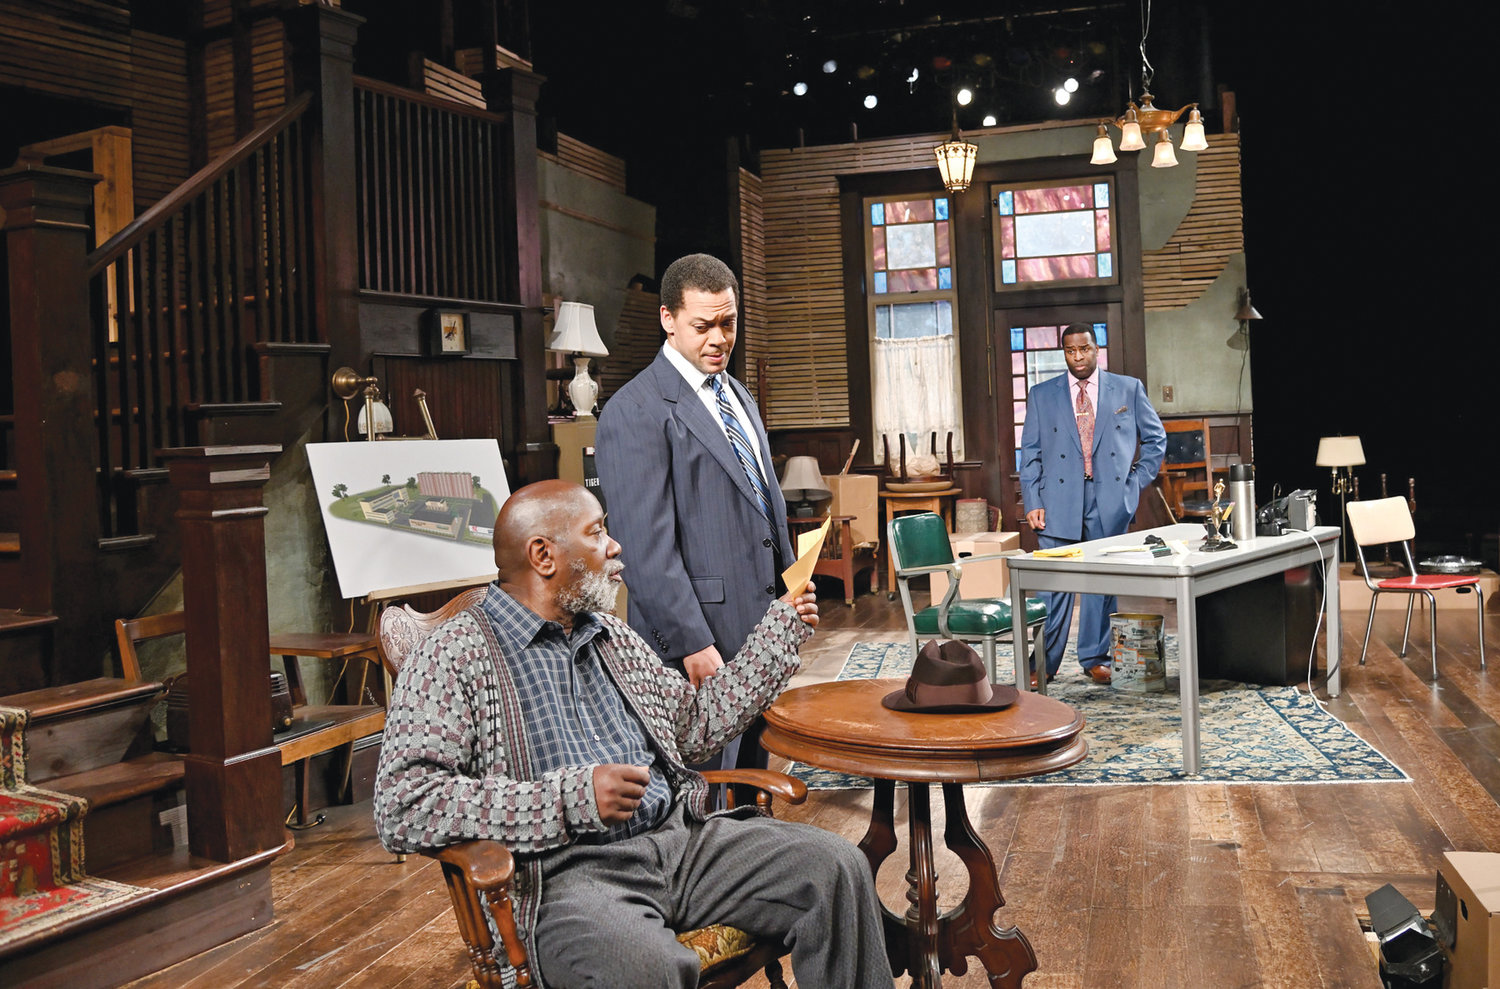 Ricardo Pitts-Wiley (front) as Elder Joseph Barlow, Joe Wilson Jr. as Harmond Wilks and Omar Robinson as Roosevelt Hicks. Directed by Jude Sandy. Set design by Michael McGarty and Baron E. Pugh, costume design by Yao Chen, lighting design by Amith Chandrashaker and sound design by Larry D. Fowler Jr.